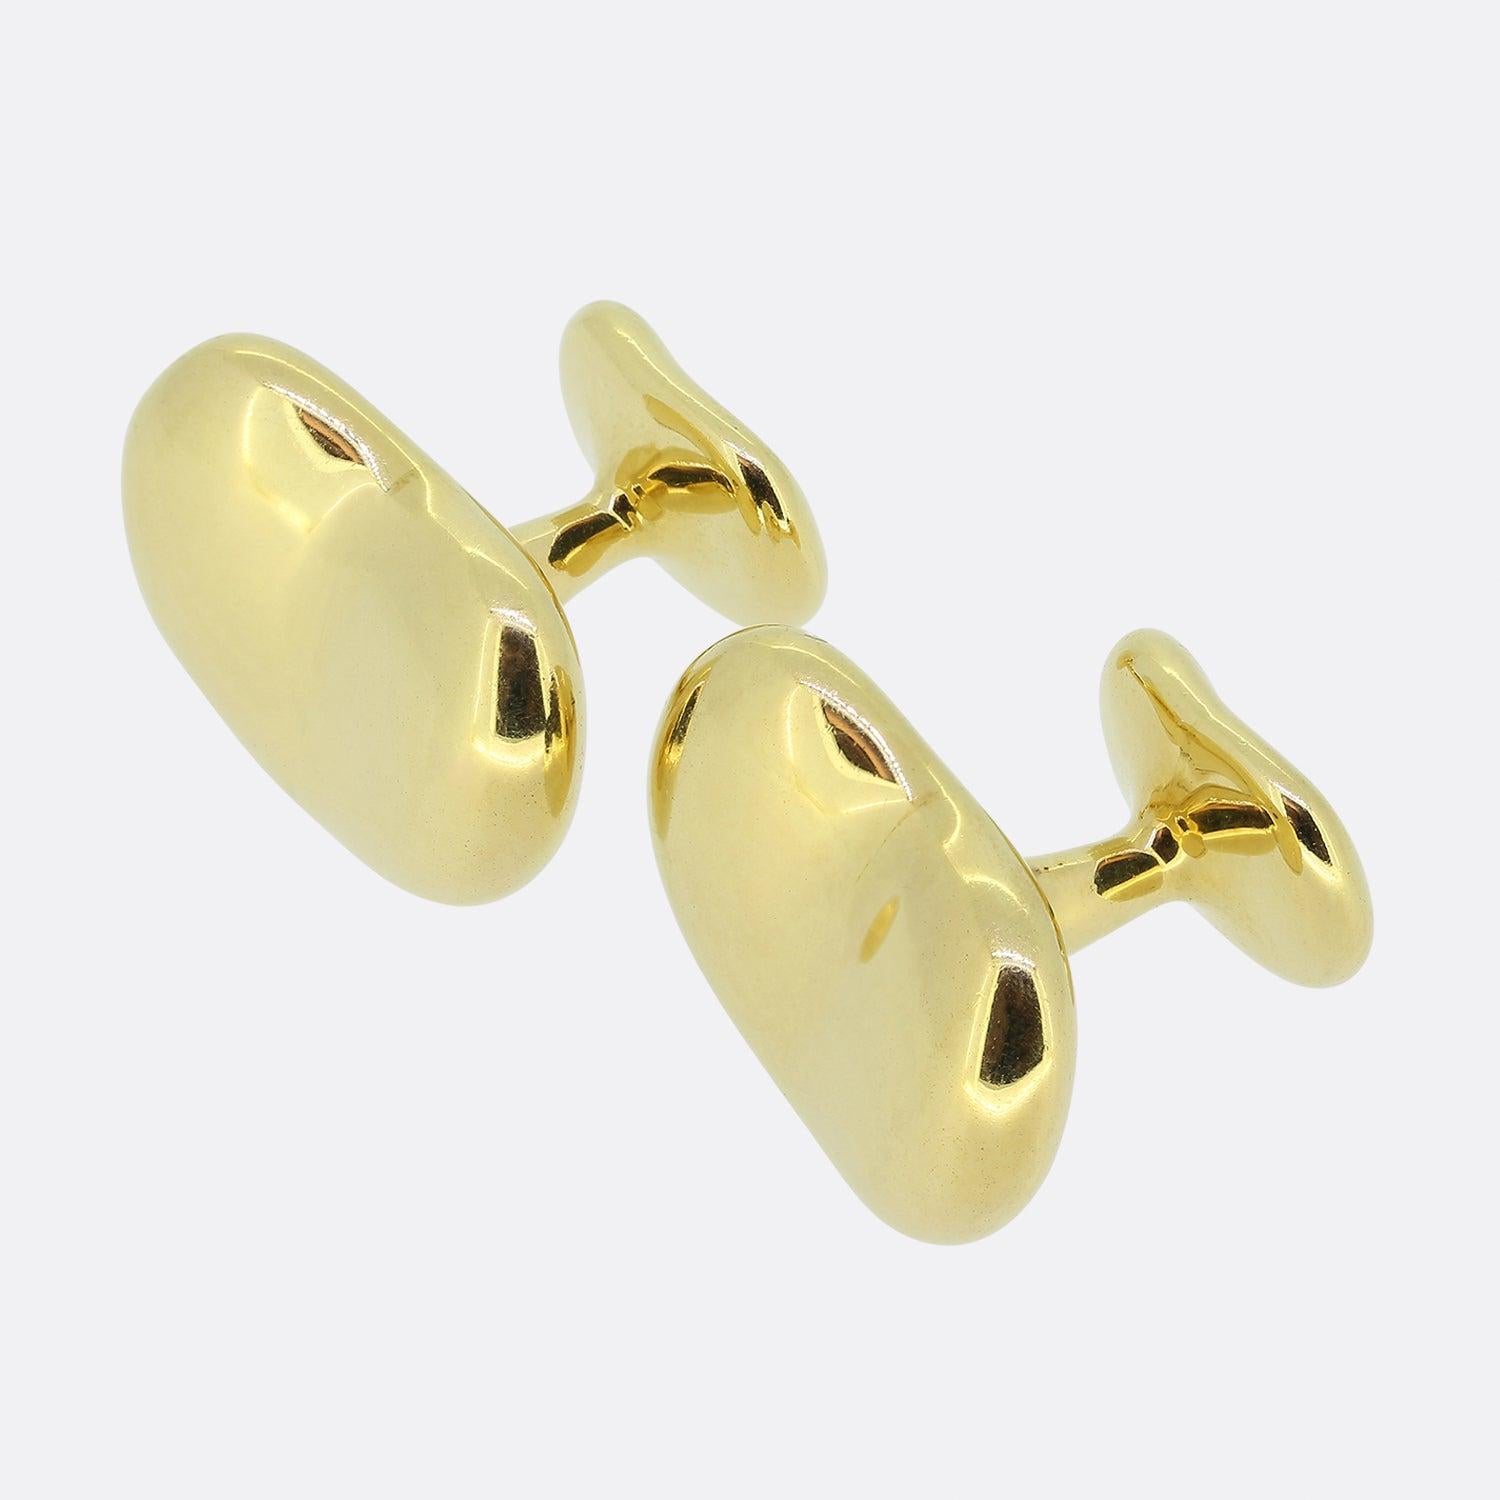 This is a vintage pair of 18ct yellow gold cufflinks from the world renowned jewellery designer, Tiffany & Co. 

Introduced in the early 1970s, Elsa Peretti’s iconic Bean design is a symbol of life’s origins. A beautifully humble form, the bean’s